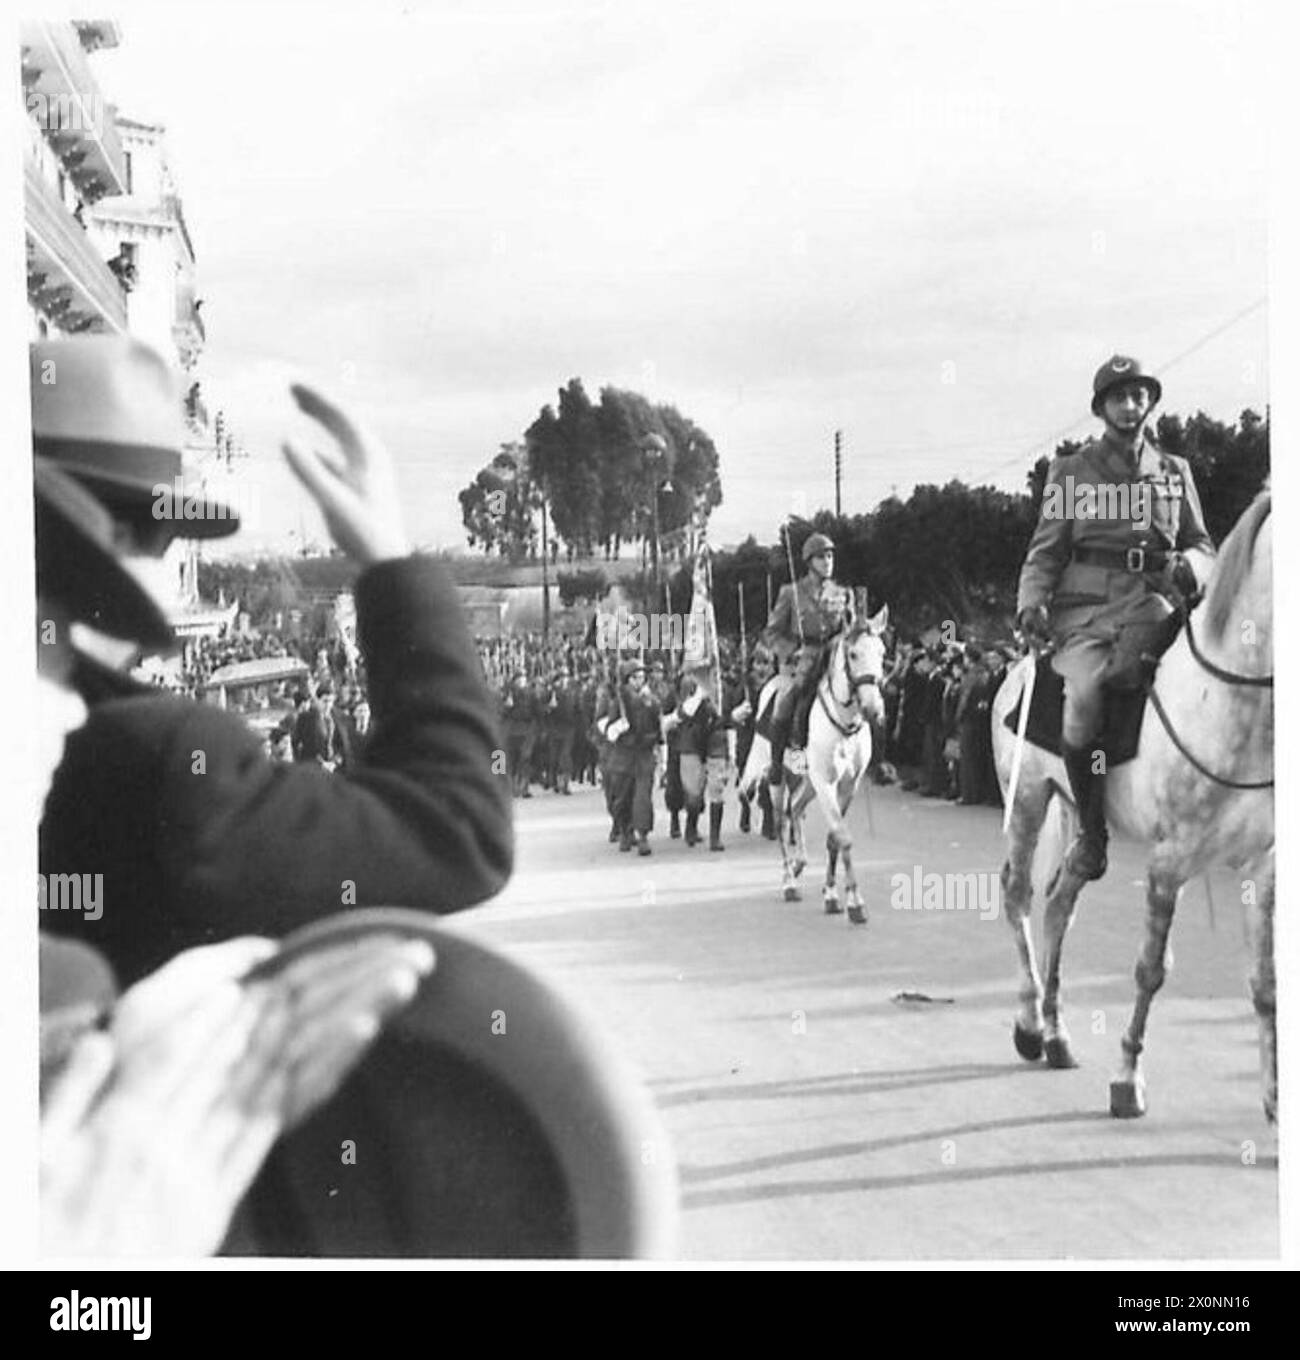 THE ALLIED OCCUPATION OF FRENCH NORTH AFRICA, 1942-1945 - A French unit, led by two officers on horseback, at a ceremonial parade in Allied-occupied Algiers. Photograph probably taken during commemoration parade of Napoleon's victory at Austerlitz, 2 December 1942 French Army Stock Photo